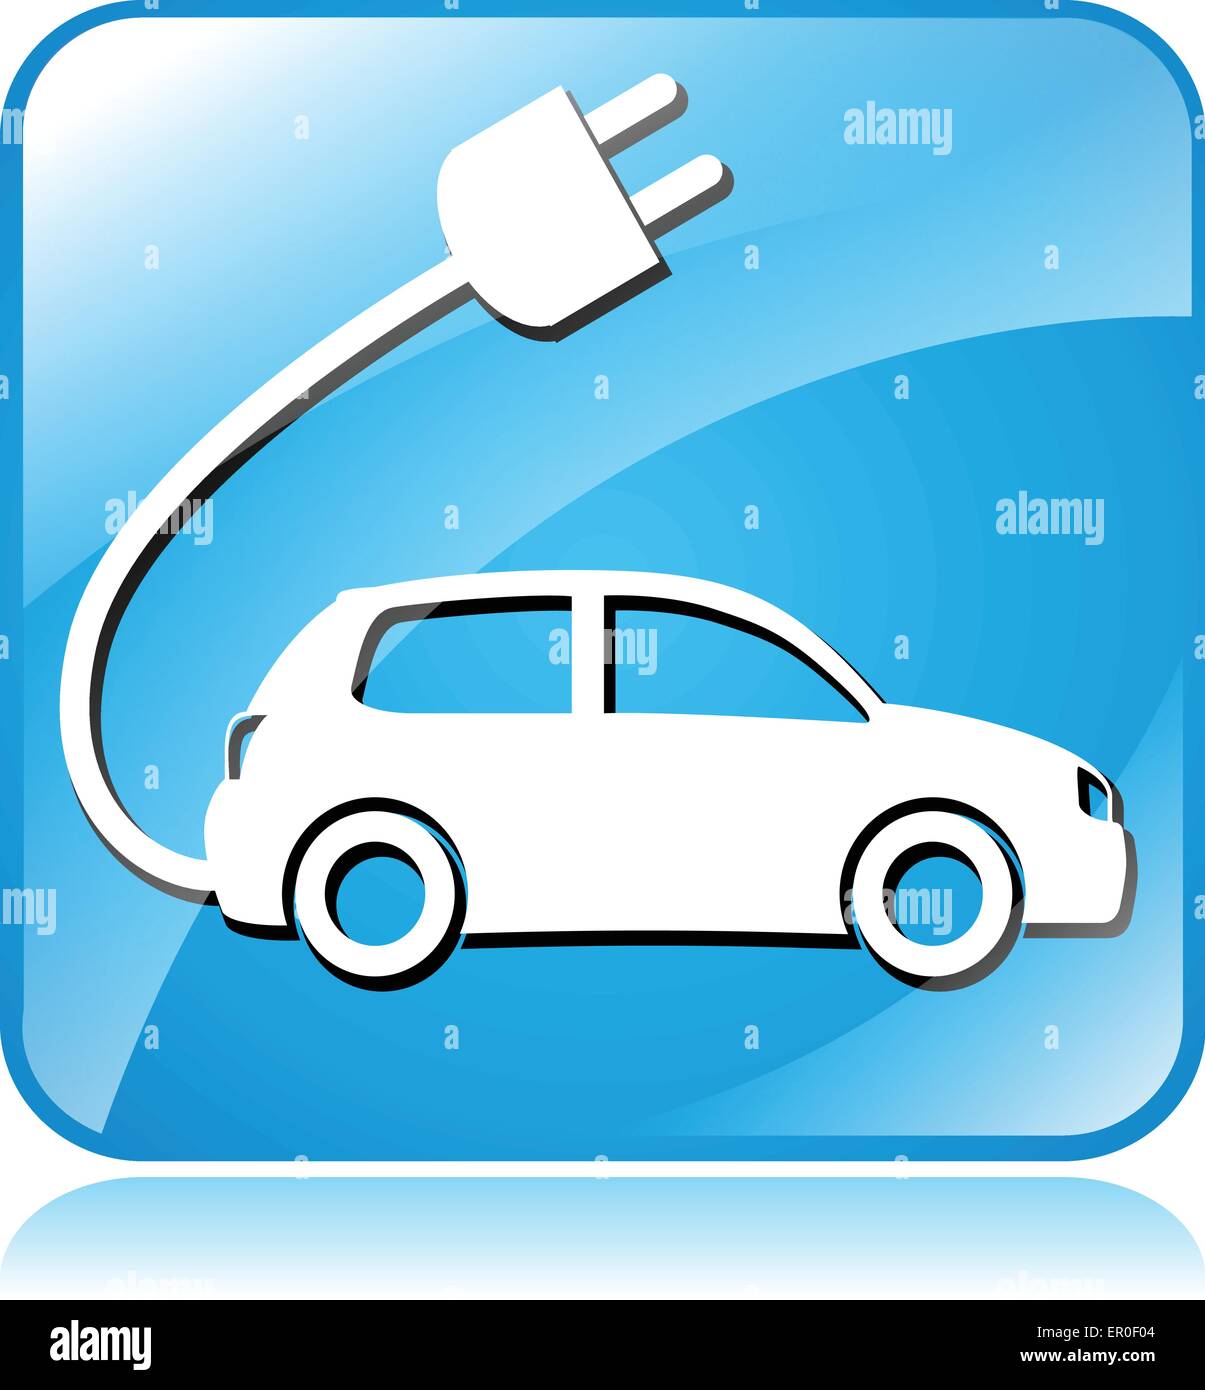 illustration of blue square icon for electric car Stock Vector